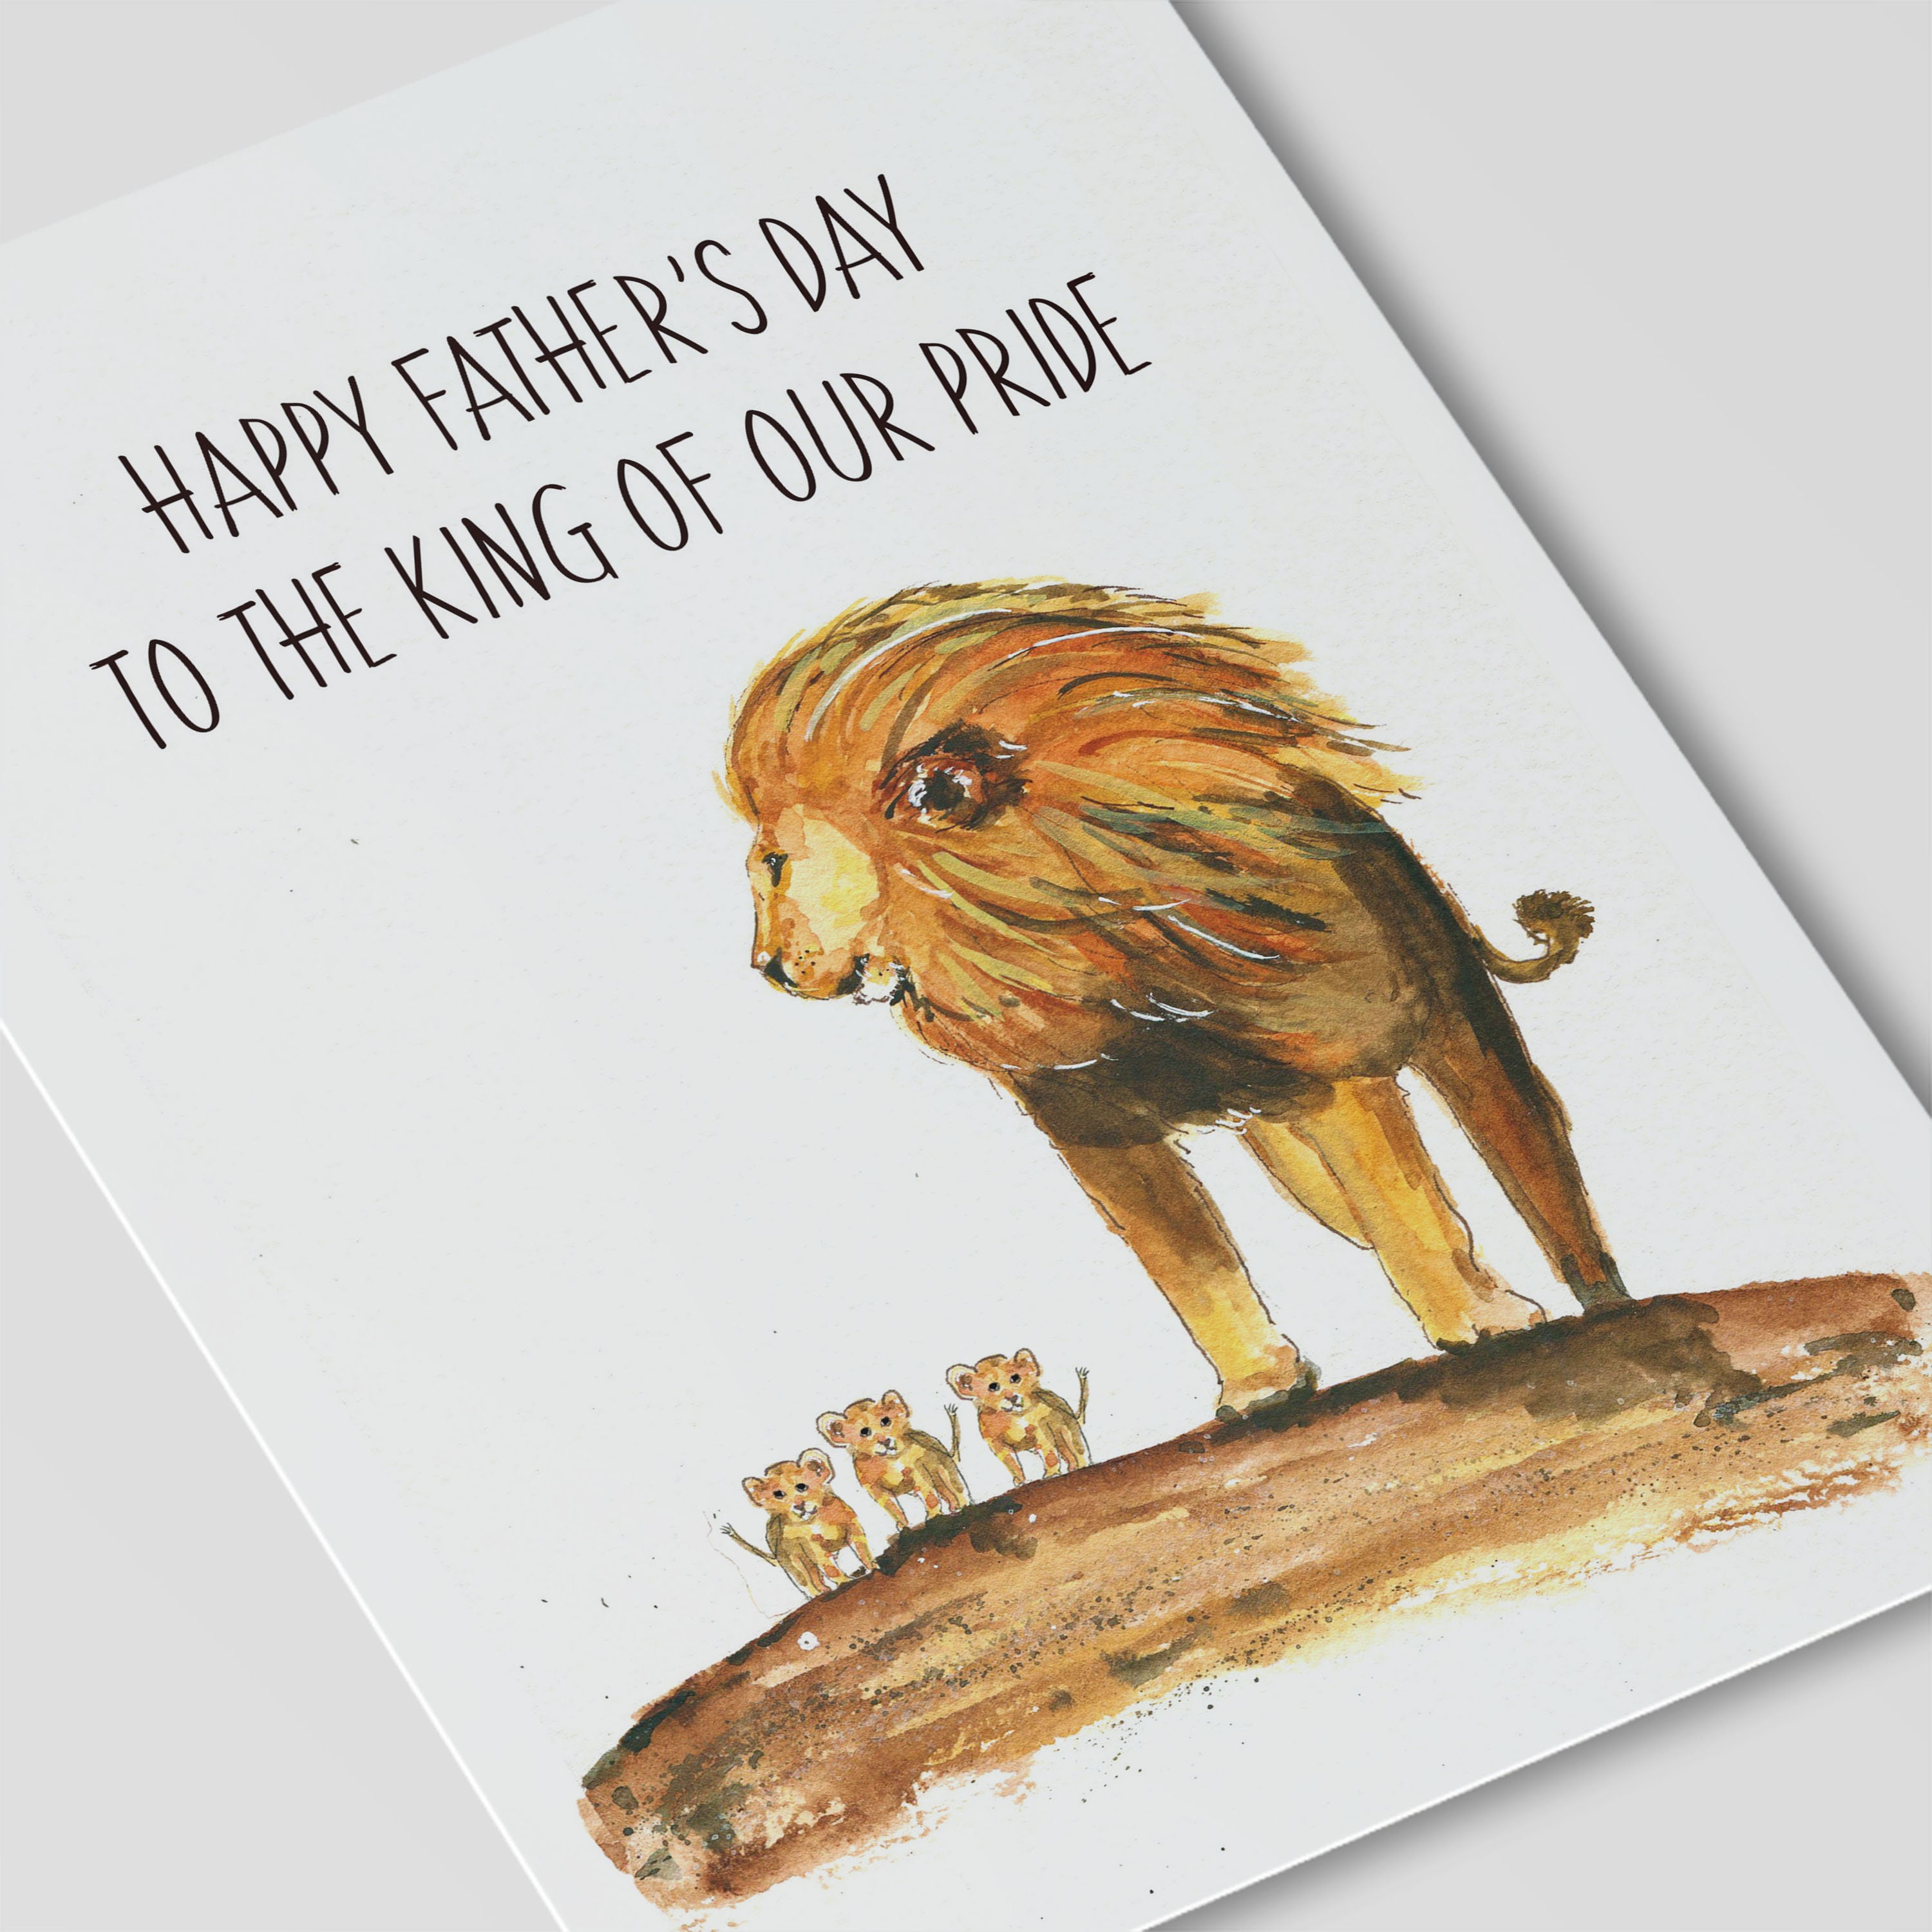 Lion Dad Card Happy Father's Day Card Lion King Card For | Etsy